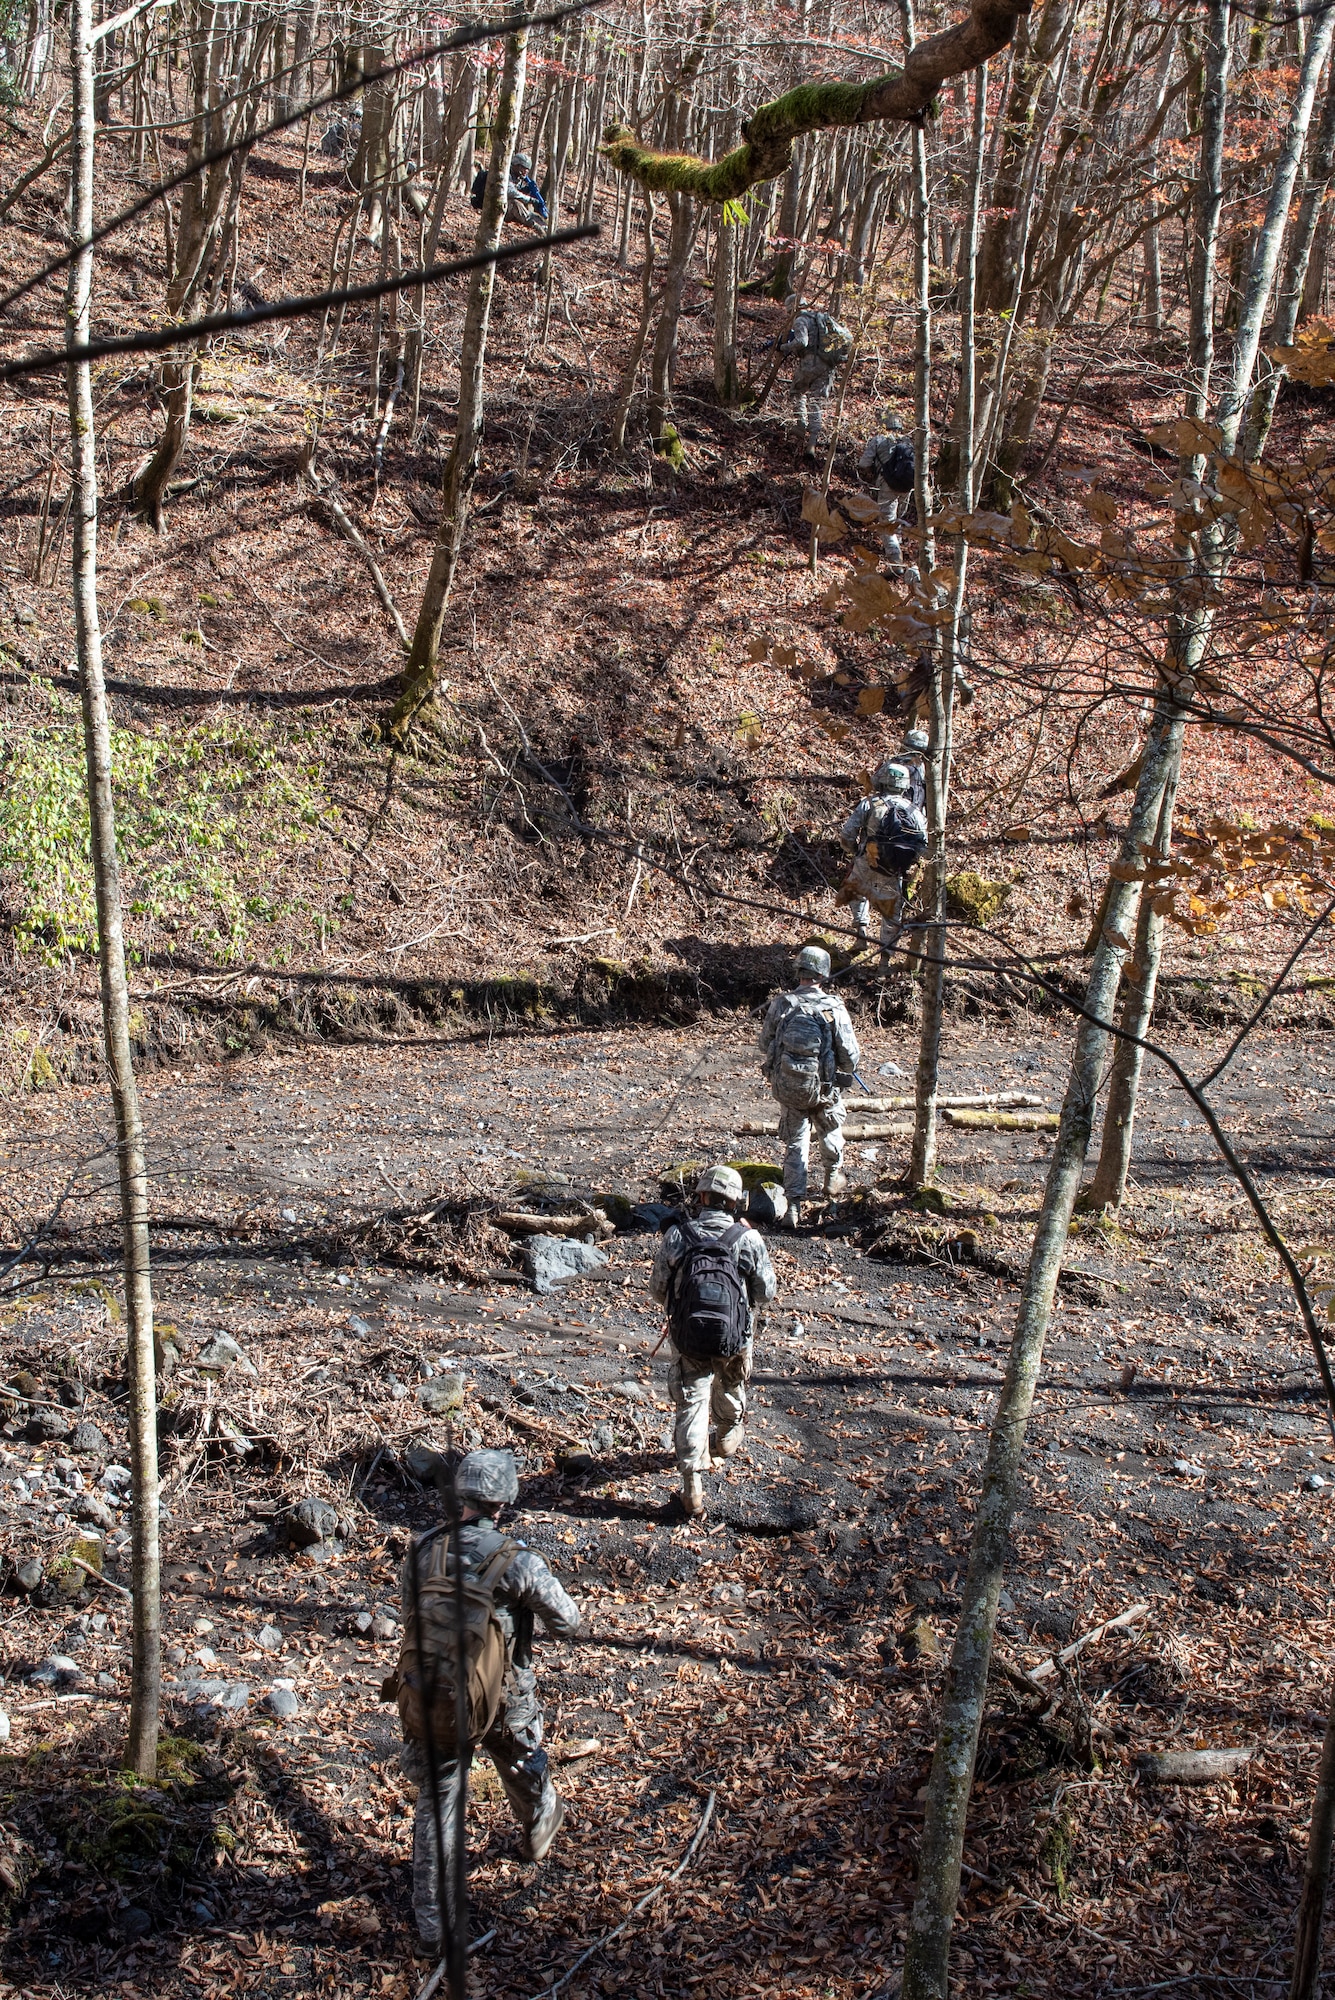 Airmen from the 374th Security Forces Squadron navigate terrain as part of a field training exercise at Camp Fuji, Japan, Nov. 8, 2018.